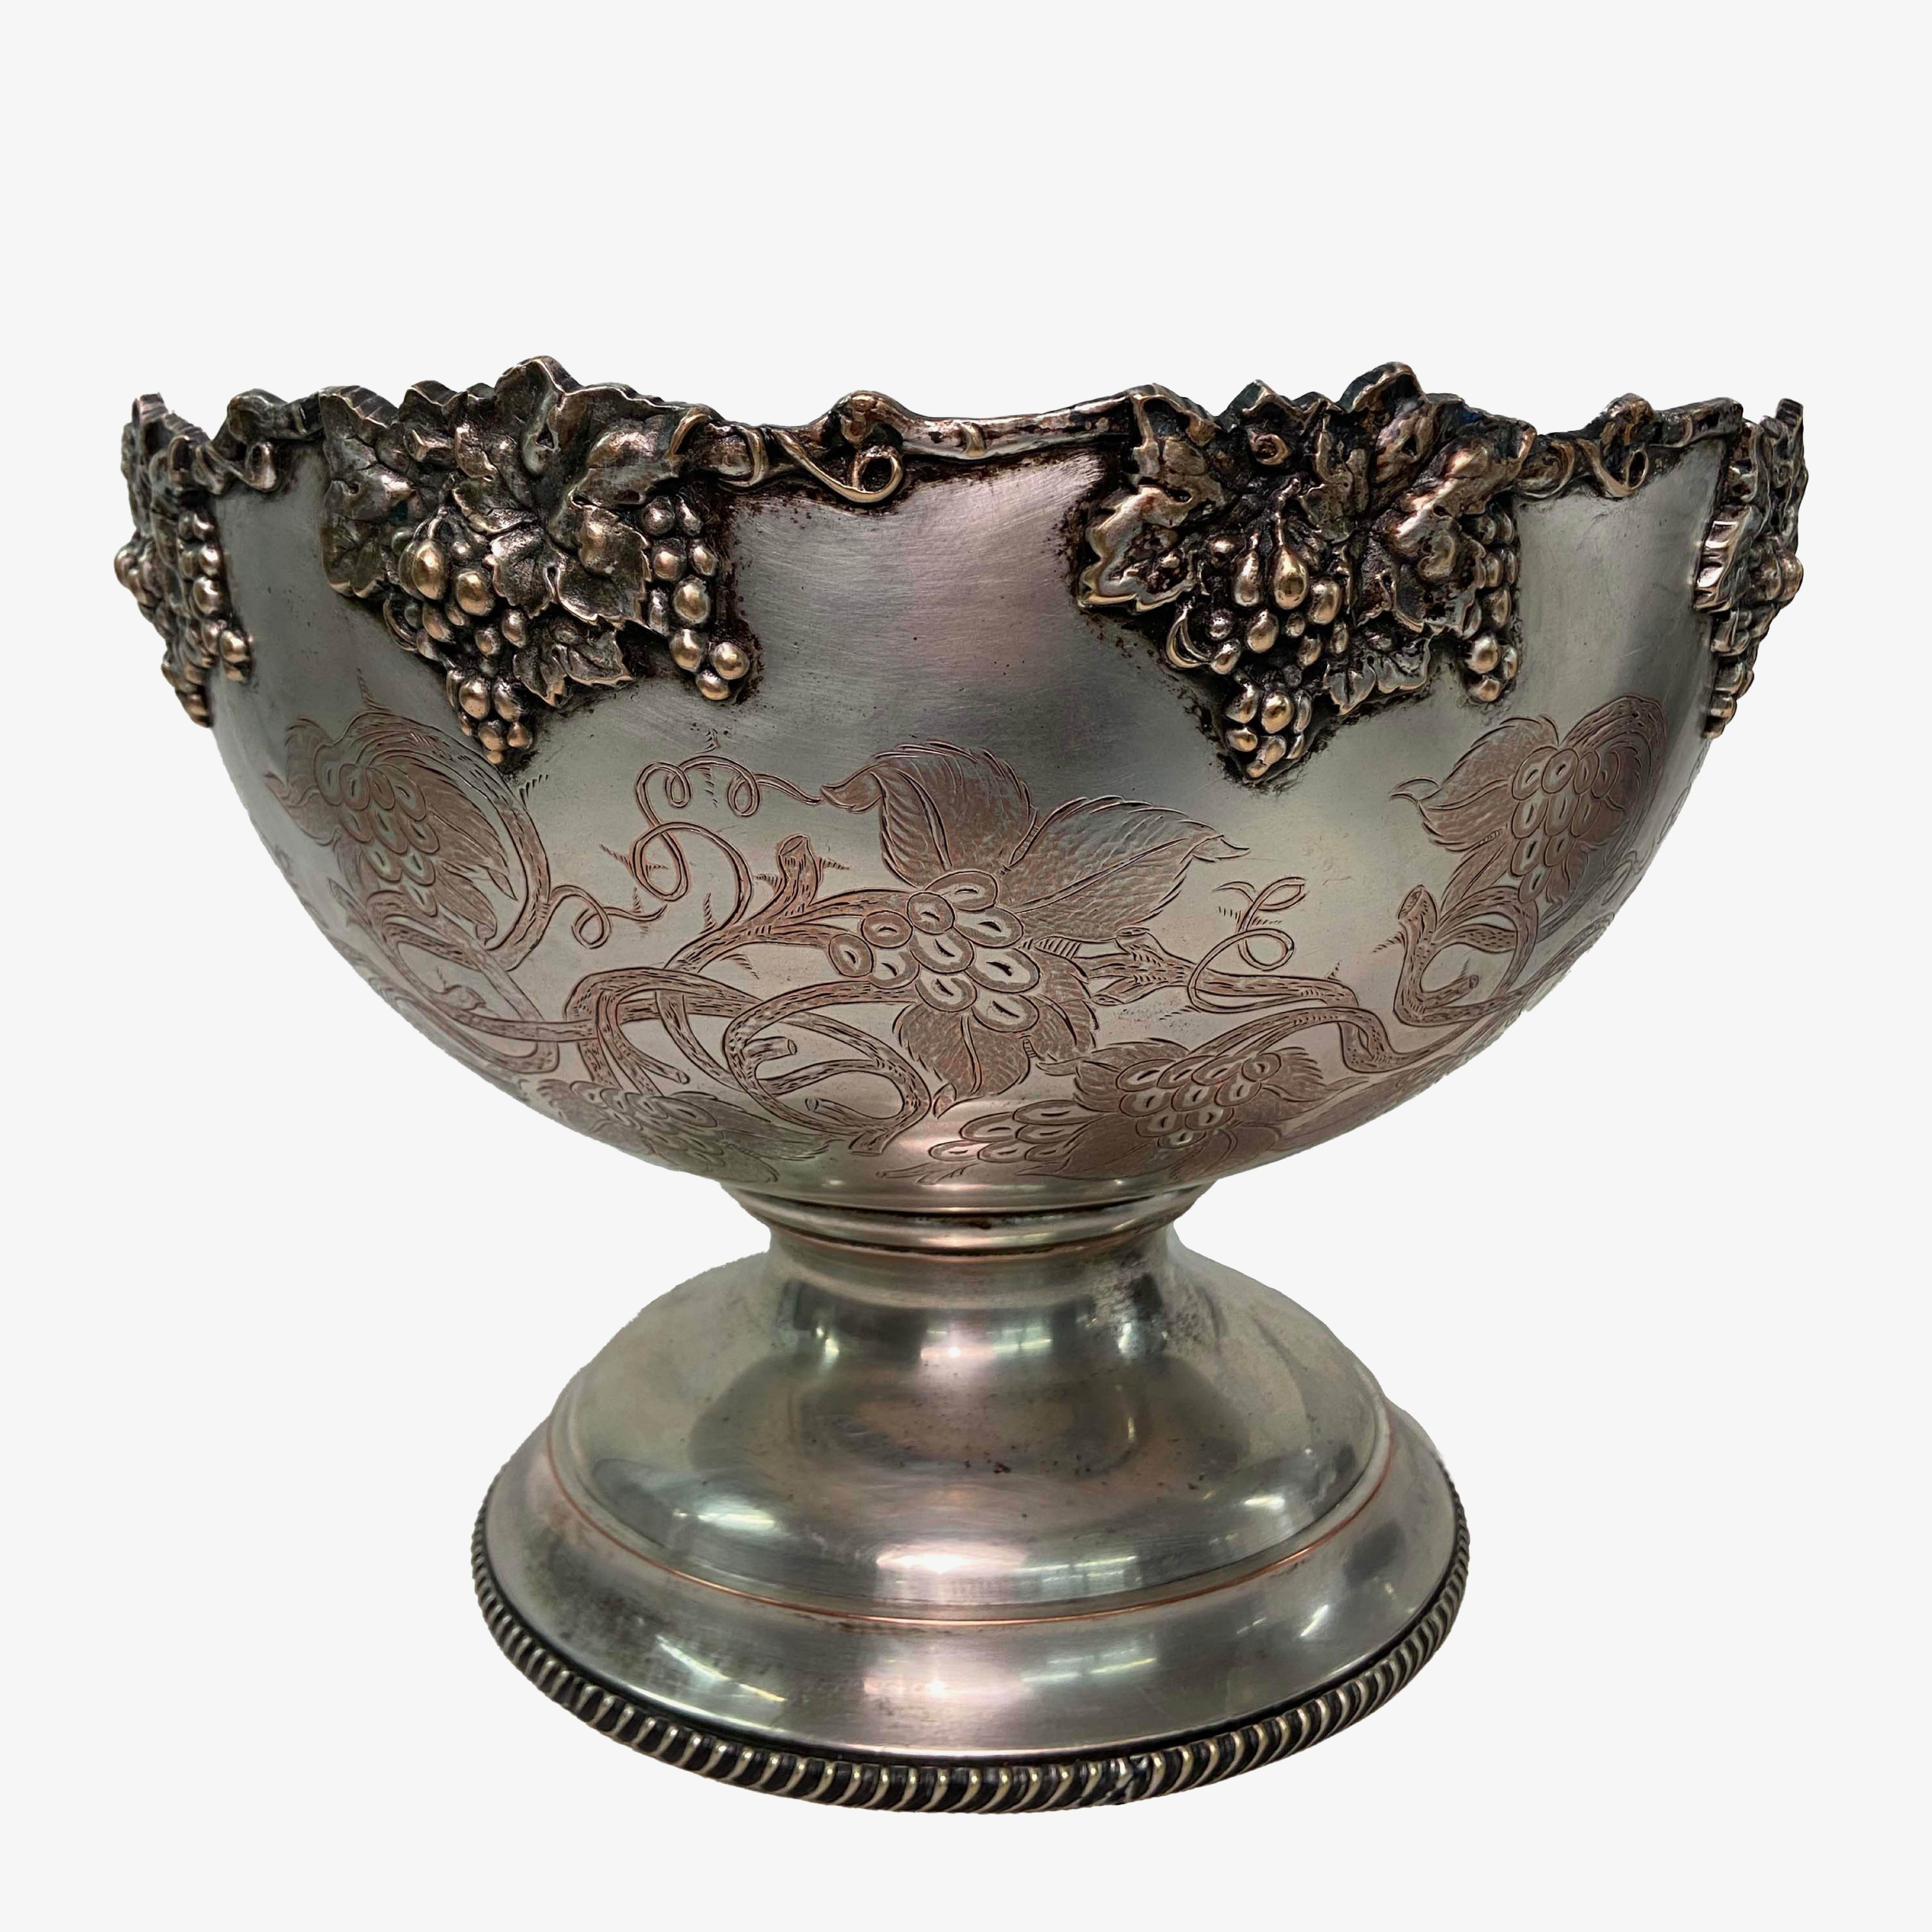 This antique silver-plated champagne/punch bowl features a beautifully aged patina throughout that has a natural and timeless appeal. The outer edge is decorated with large clusters of grapes and grape leaves. It is also embossed with the same